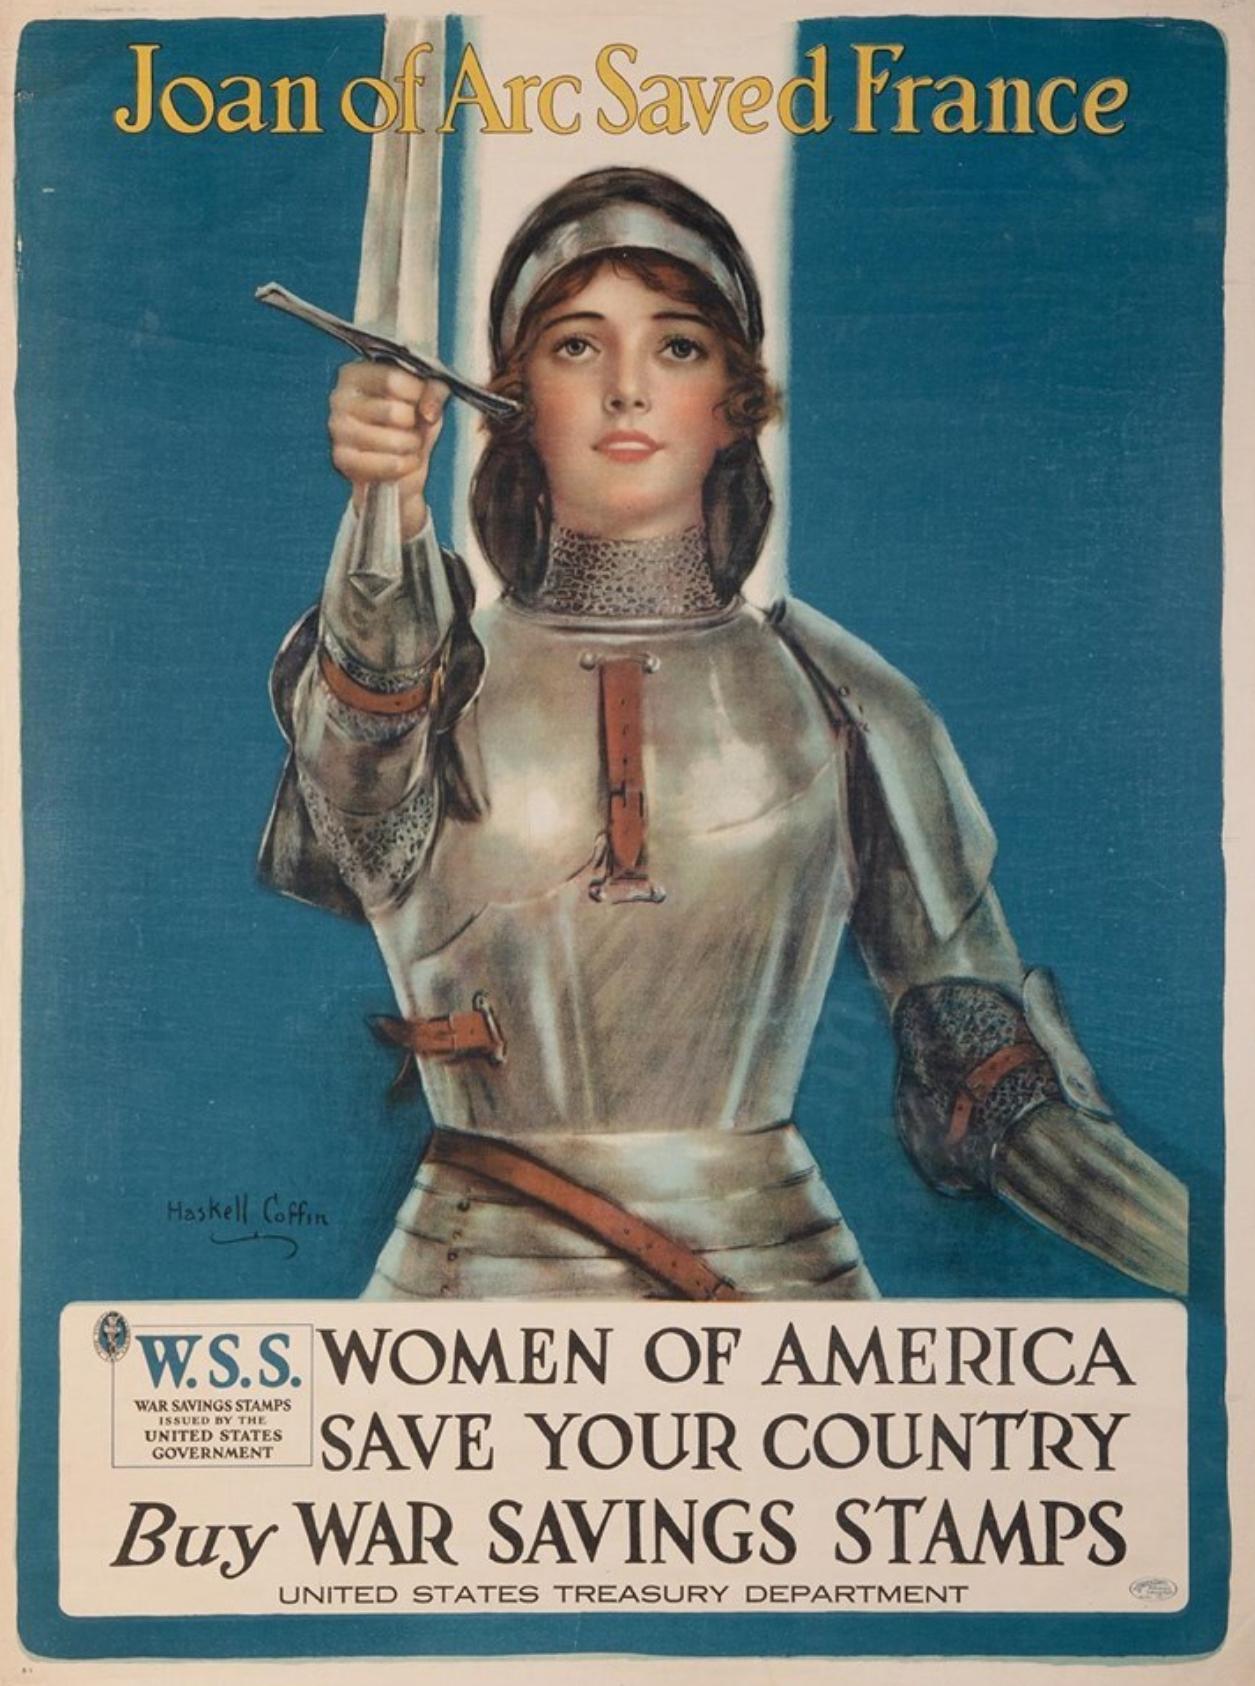 This is an original WWI War Savings Stamp poster by the acclaimed artist Haskel Coffin, dating to 1917. The poster features a portrait of Joan of Arc, clad in full armor, with a sword raised above her body, ready for battle. At the top is yellow